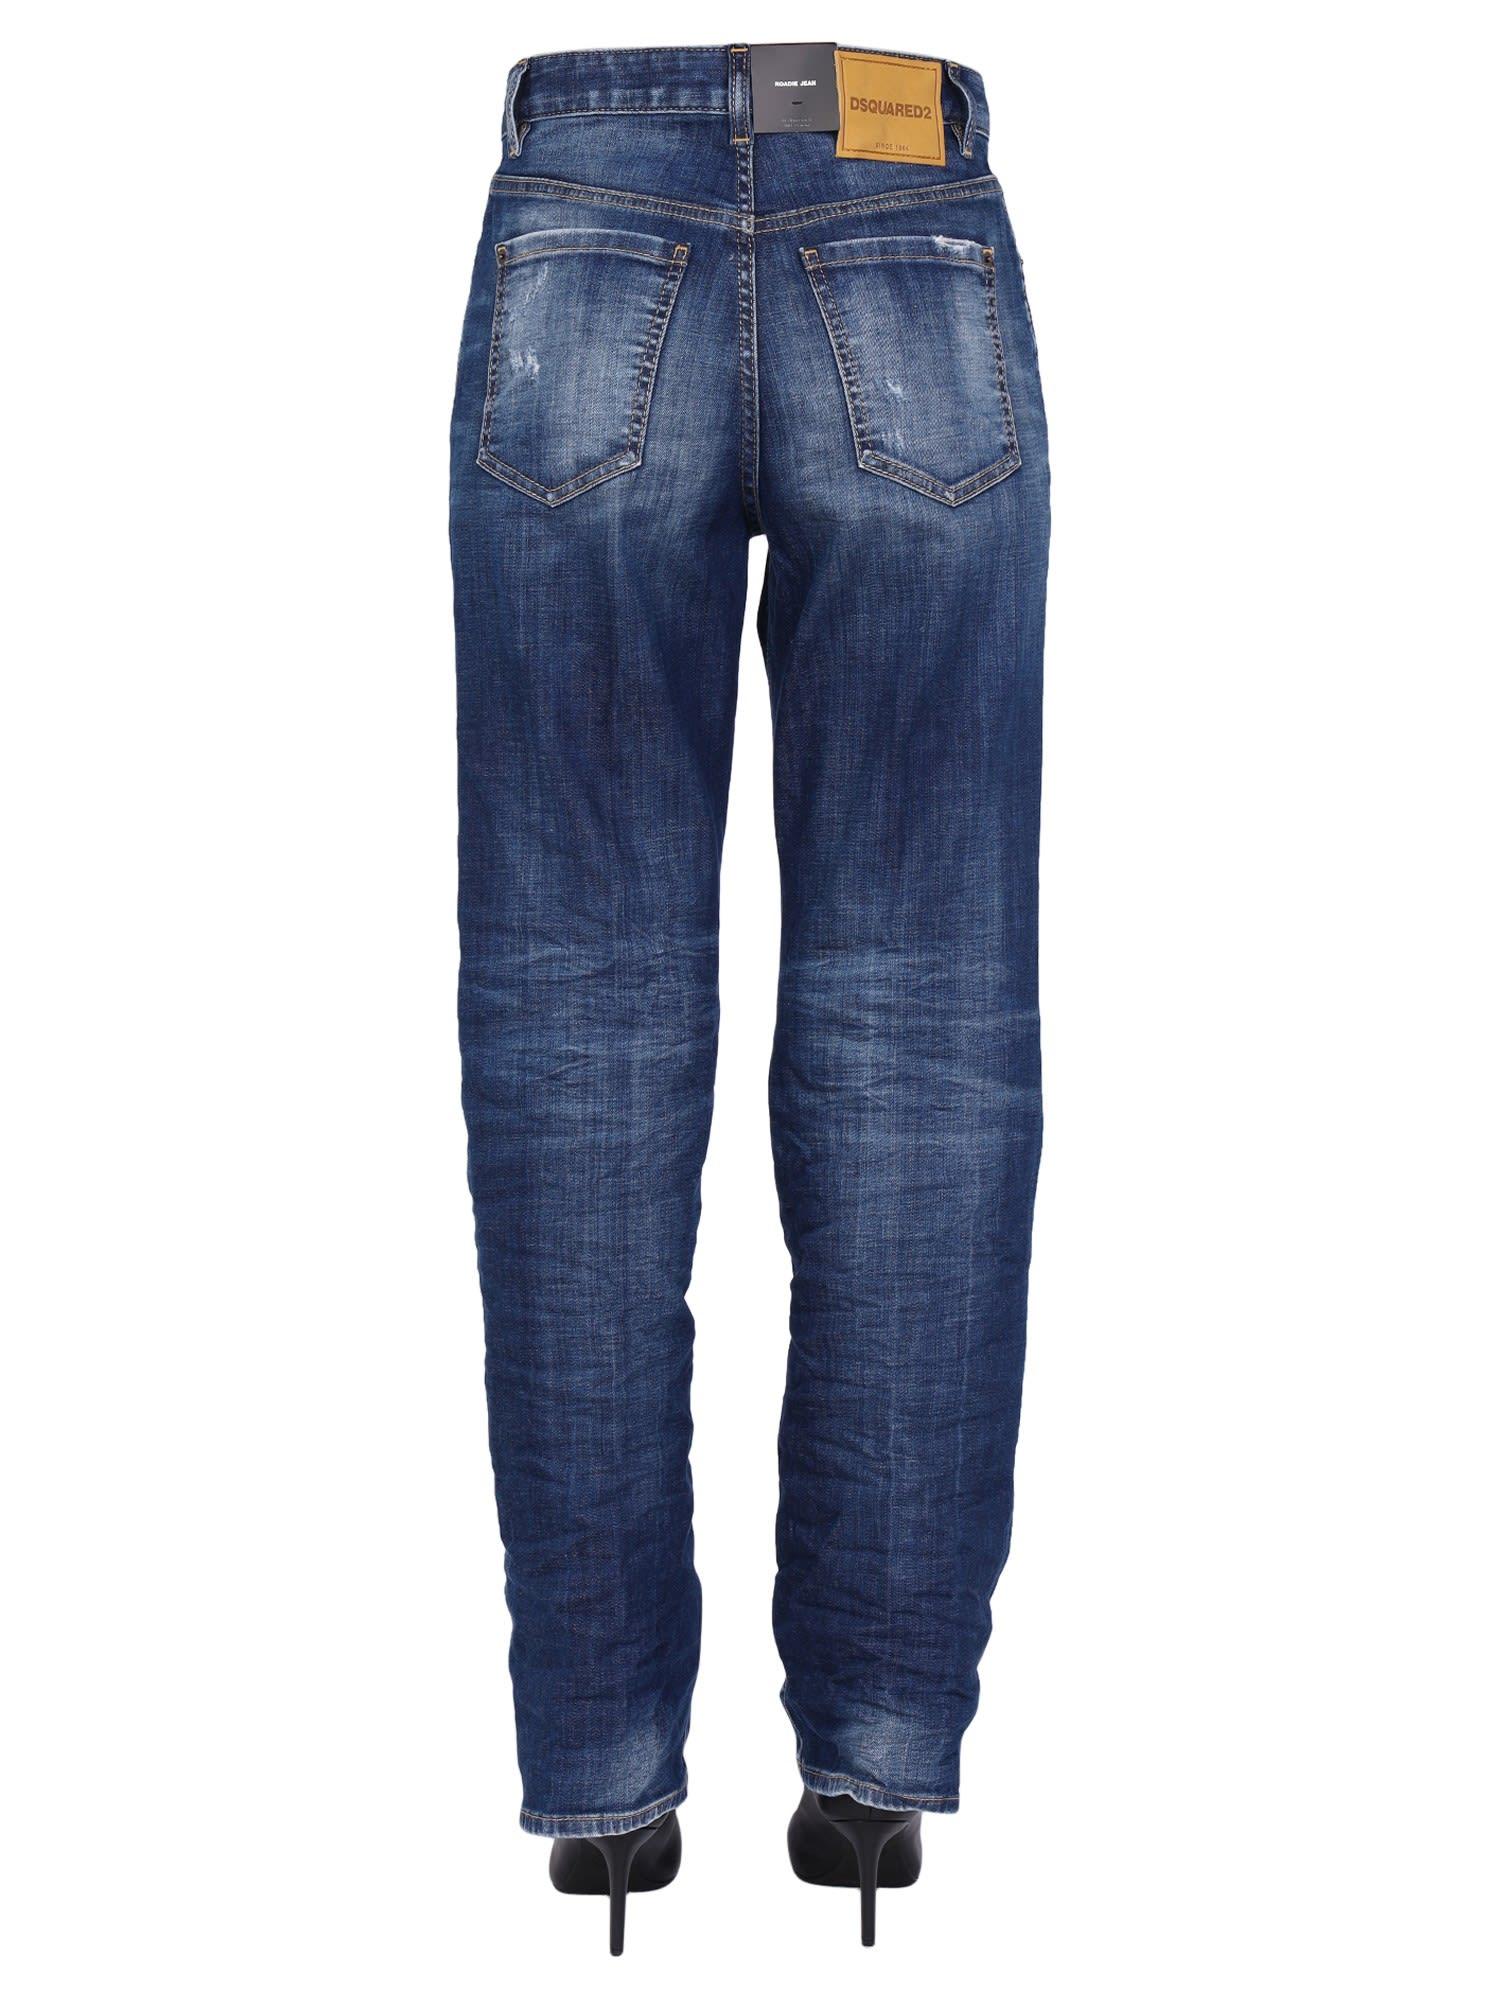 Womens Jeans DSquared² Jeans - Save 12% DSquared² Denim Clean Vintage Wash Roadie Jeans in Blue Navy Blue 